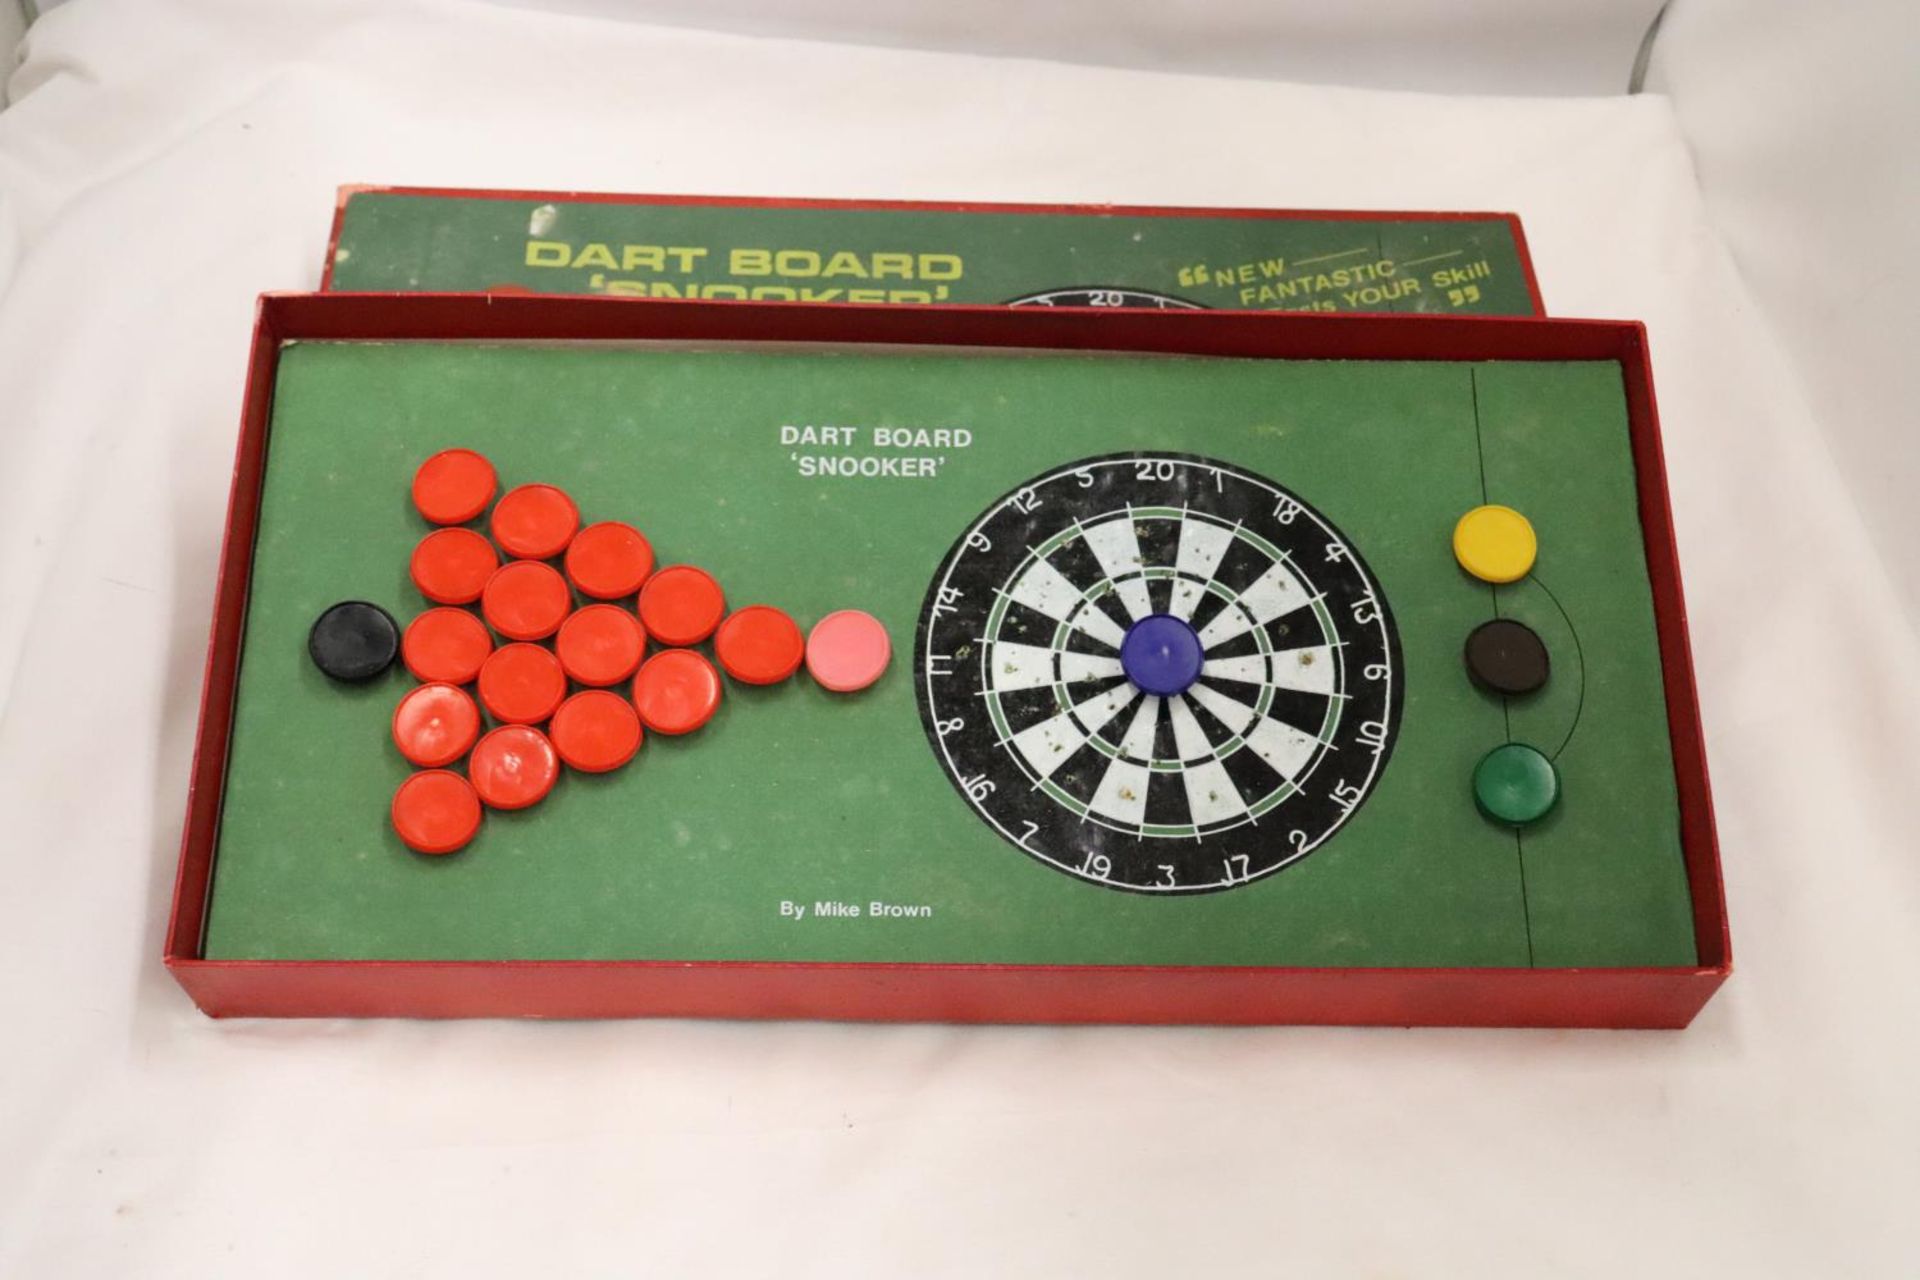 A RARE VINTAGE BOXED DART BOARD SNOOKER GAME - Image 2 of 6